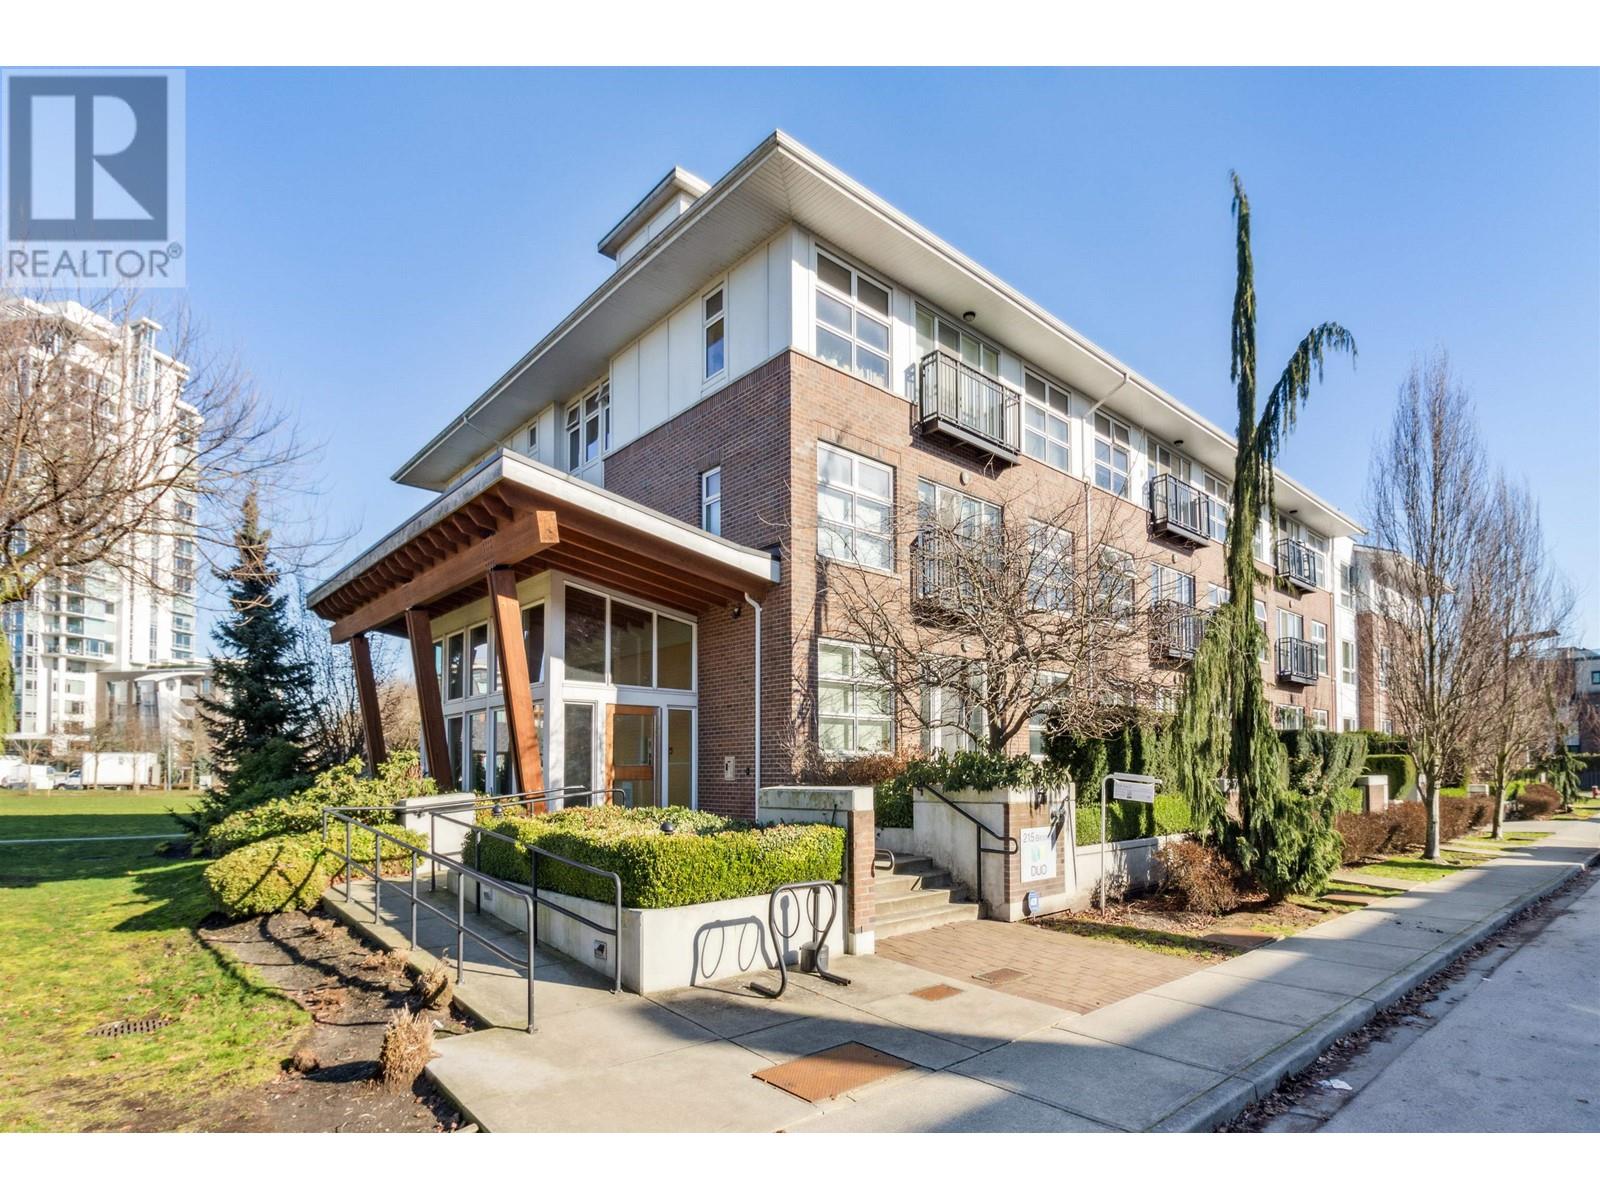 106 215 BROOKES STREET, new westminster, British Columbia